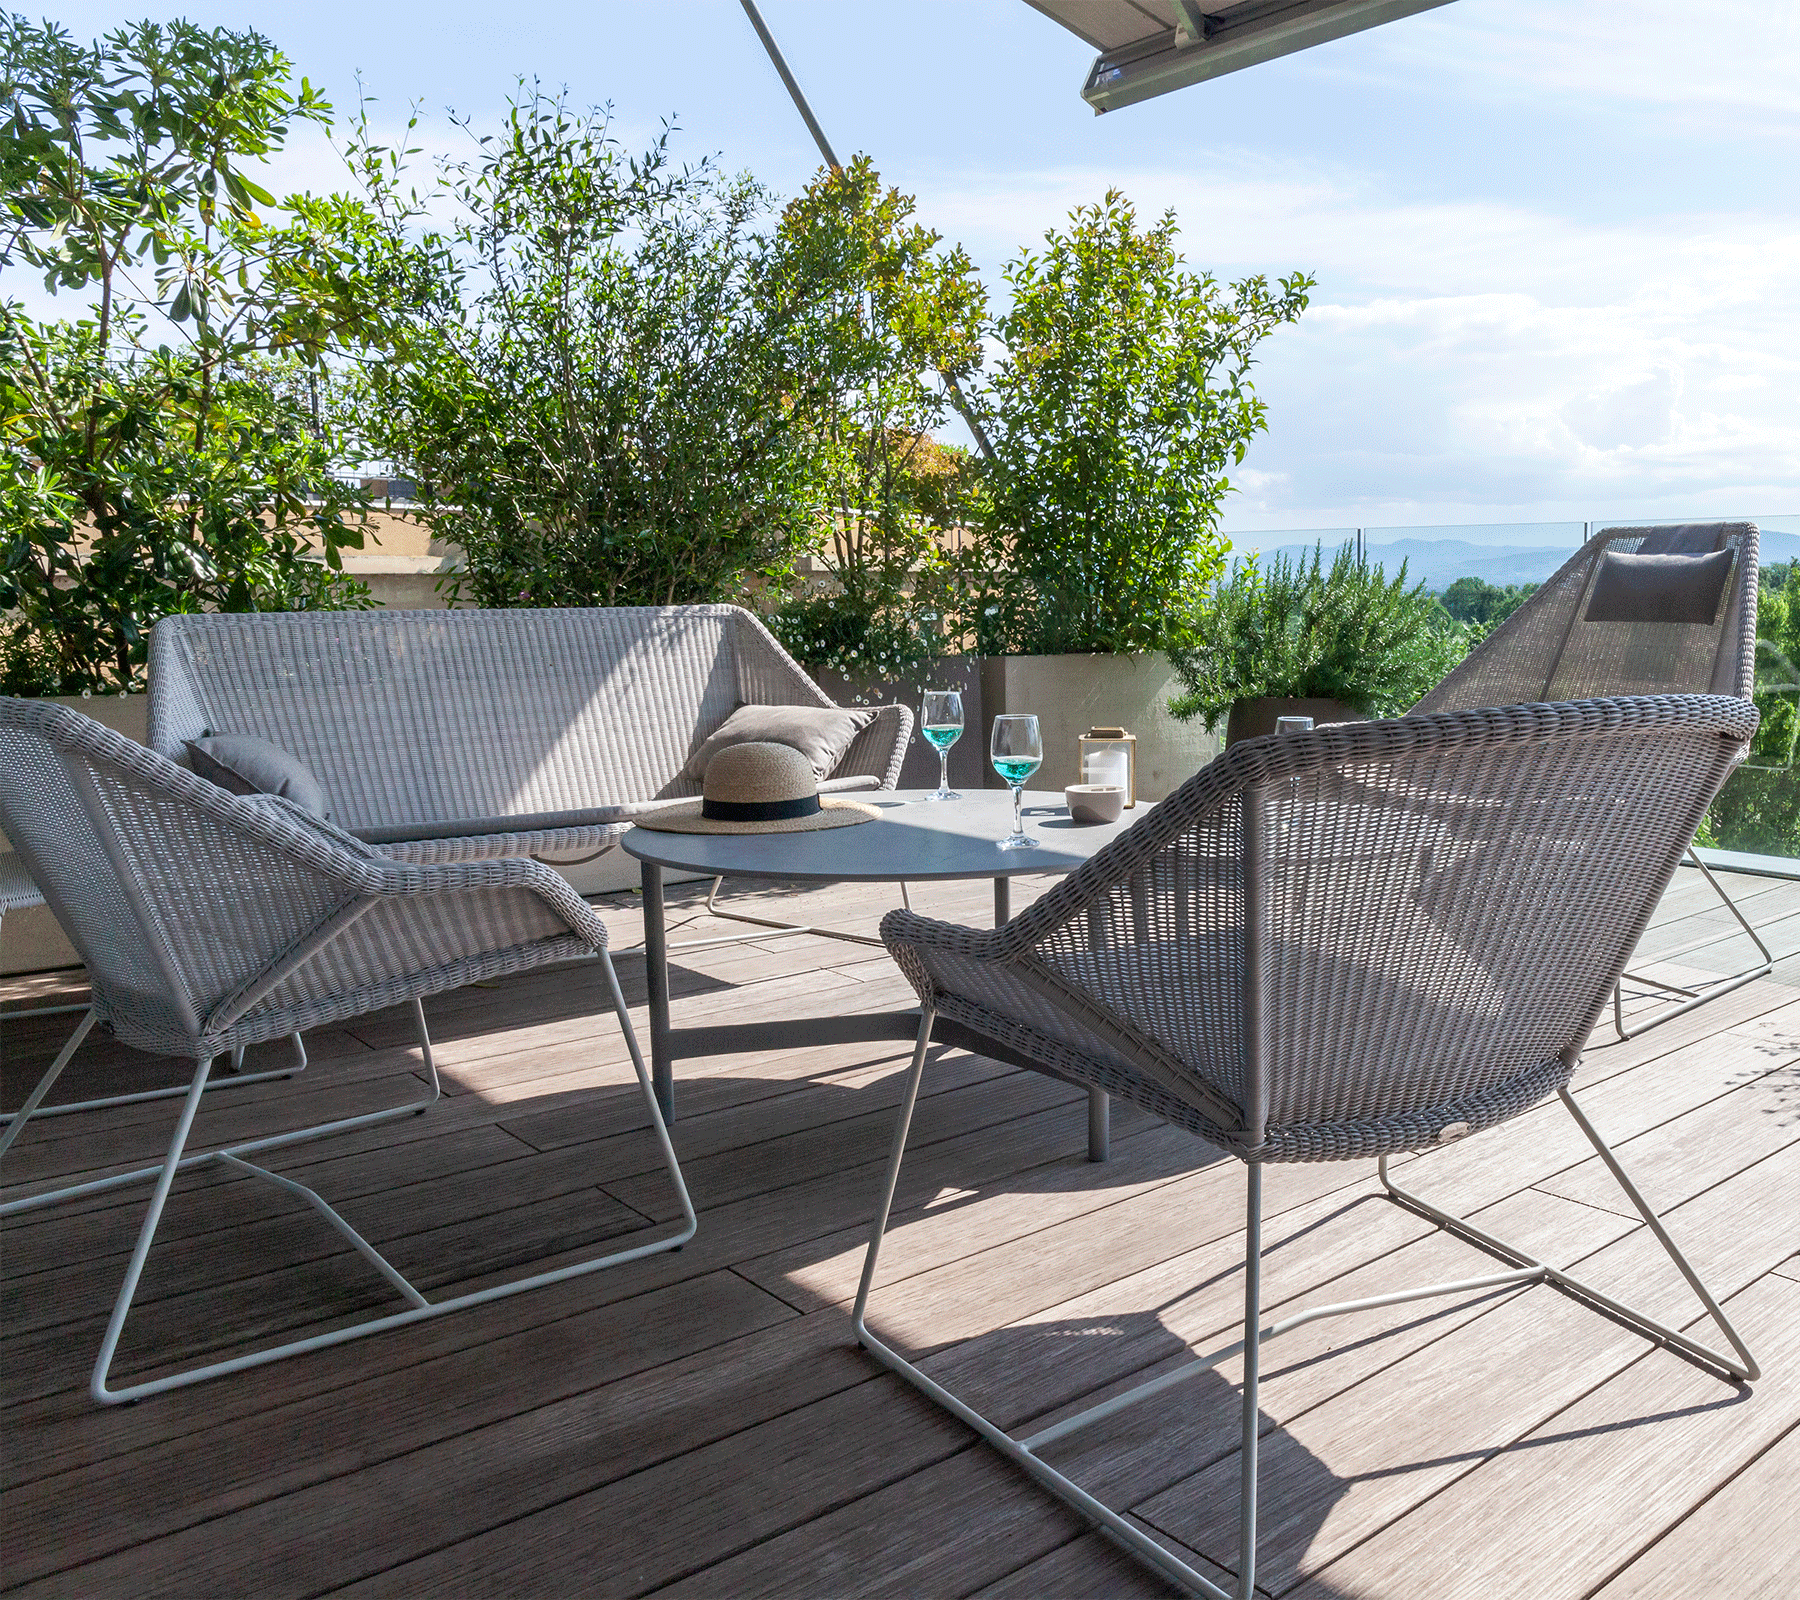 Boxhill's Breeze Outdoor Lounge Chair White Grey lifestyle image with Breeze 2-Seater Sofa ang Breeze Highback Chair